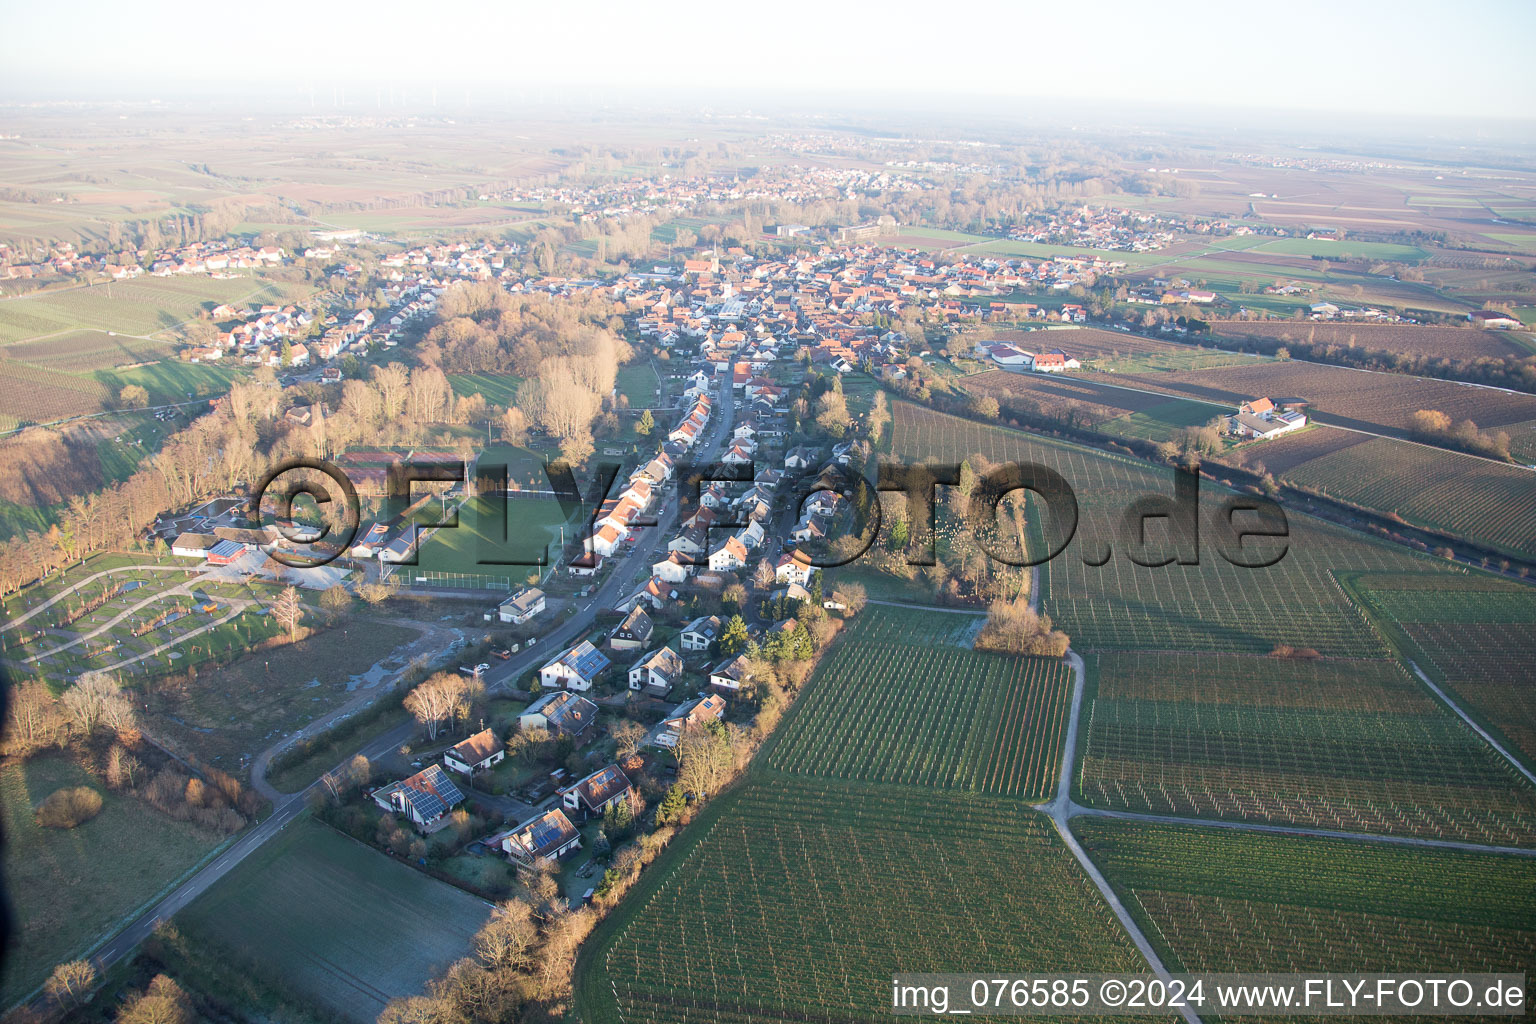 Aerial view of Camping in the Klingbachtal in the district Klingen in Heuchelheim-Klingen in the state Rhineland-Palatinate, Germany